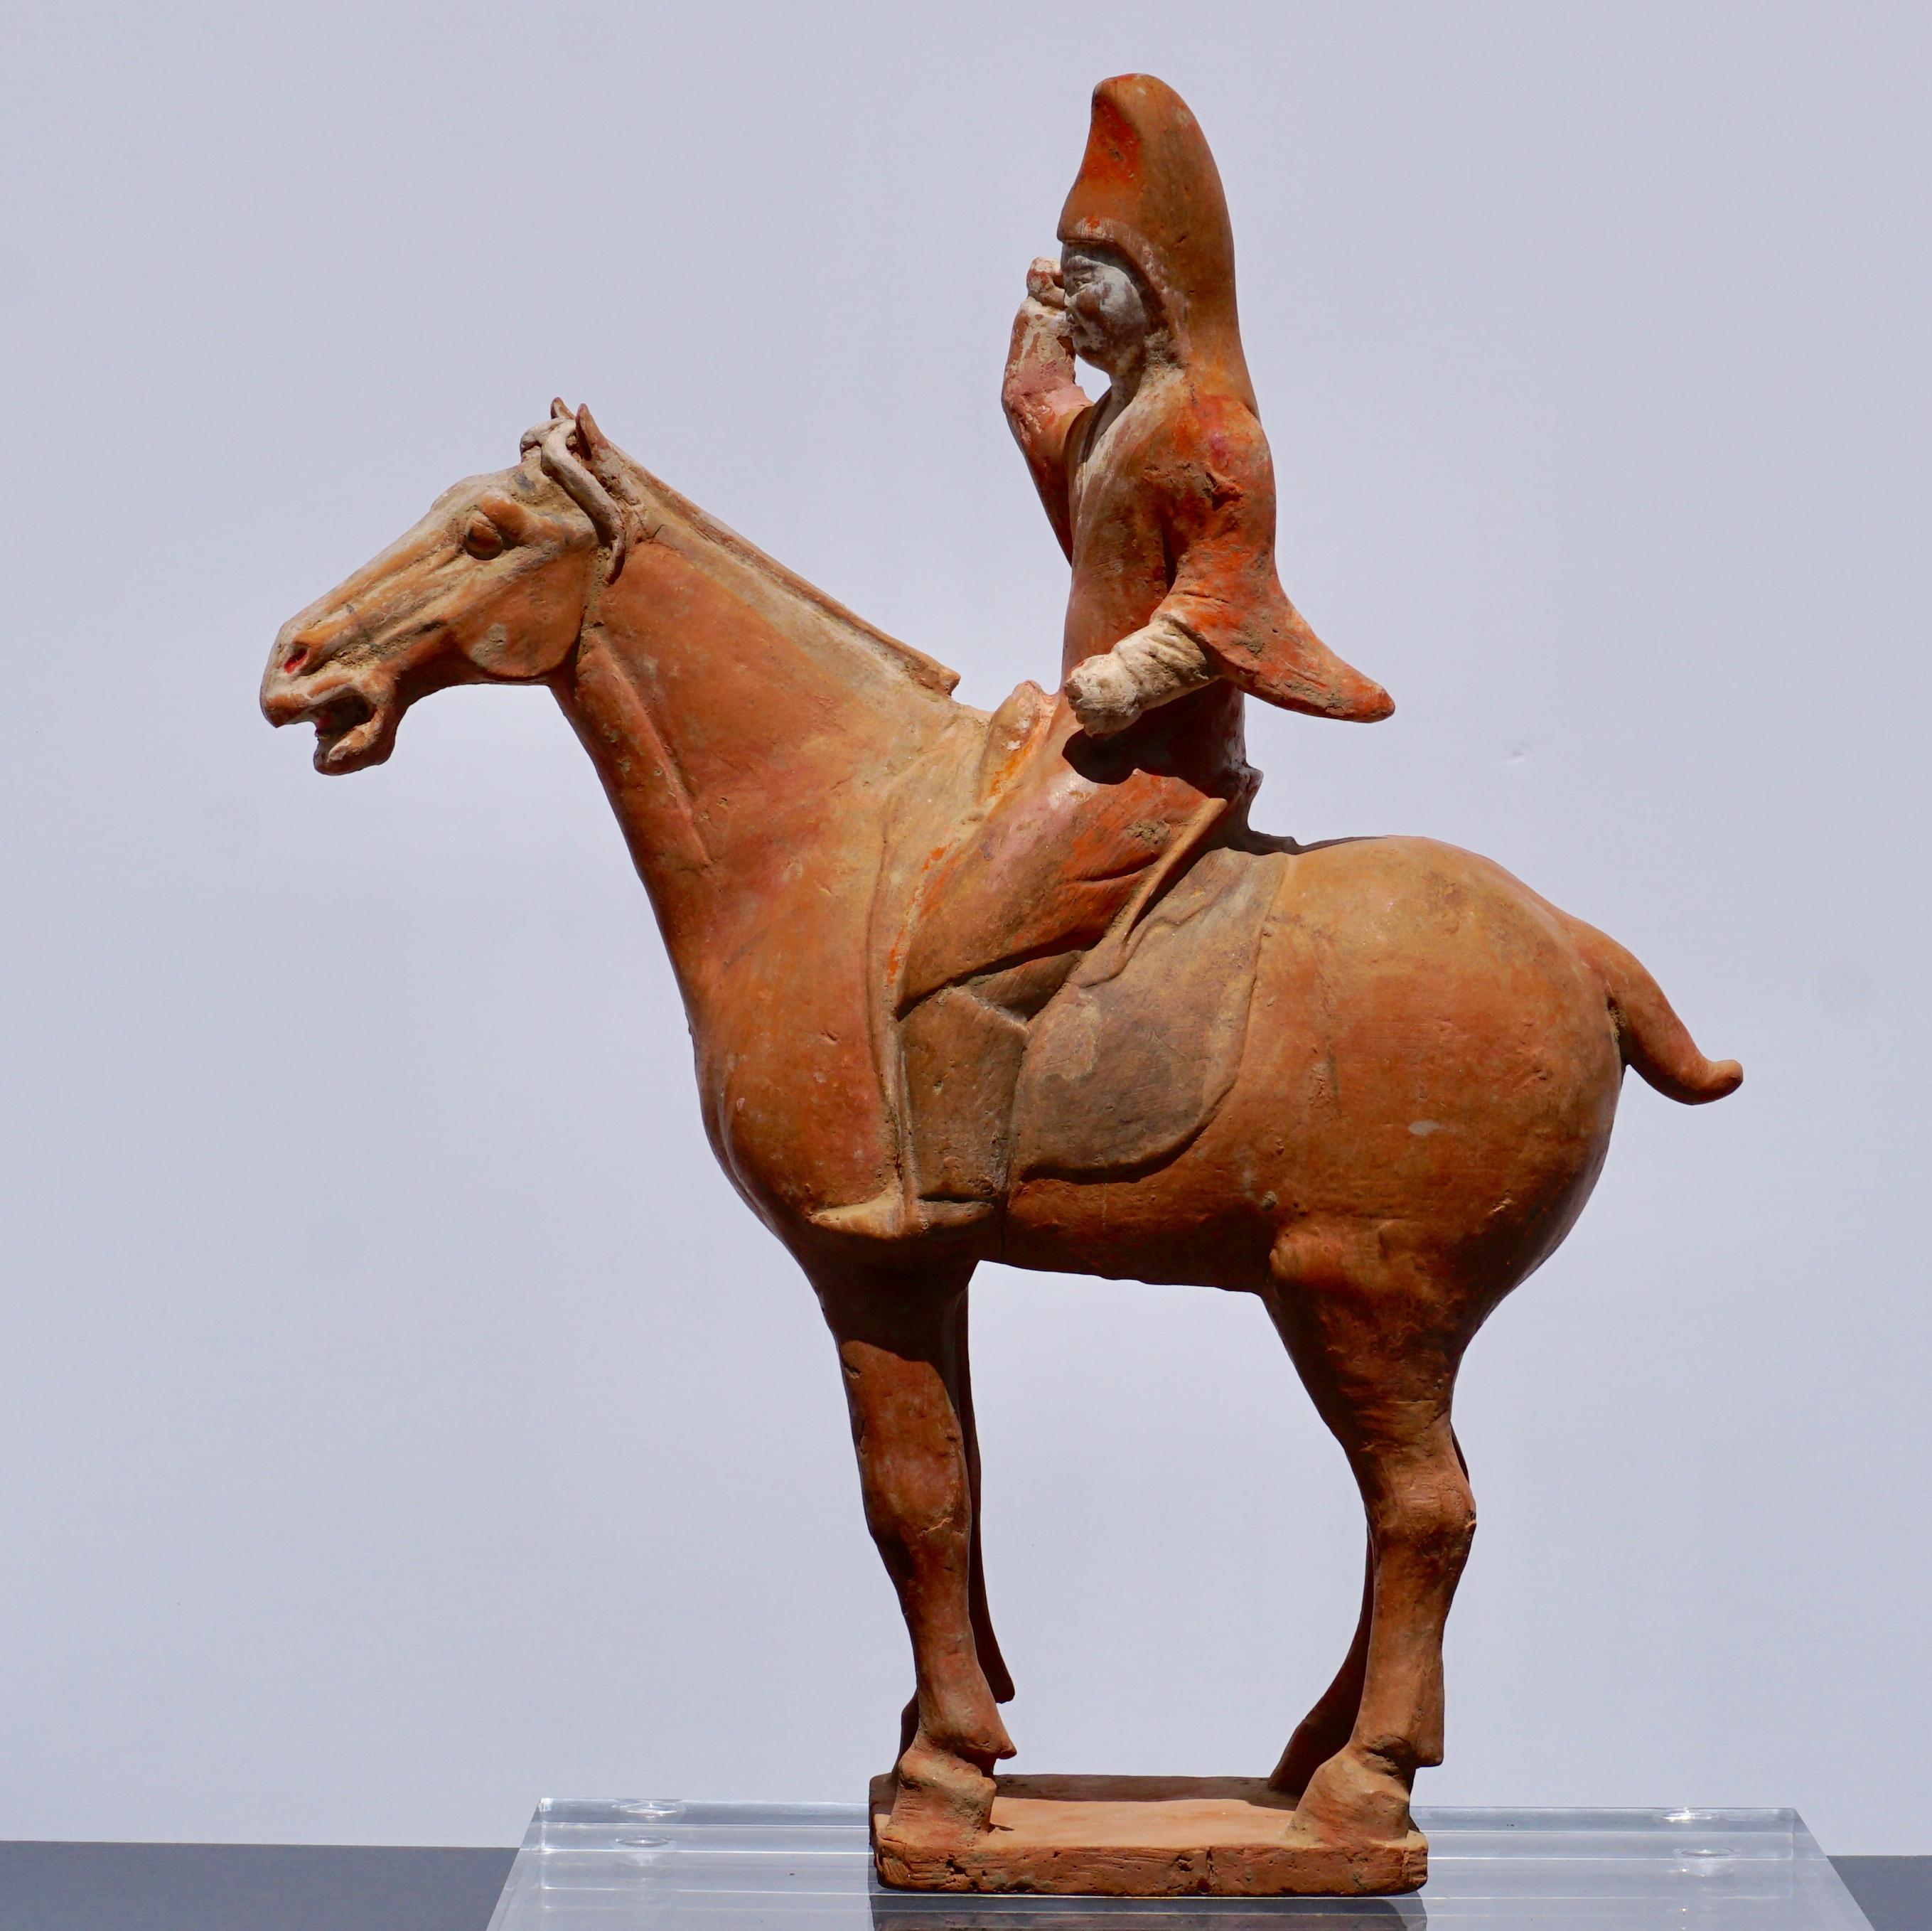 This statuette of a horse with rider was made in terracotta during the Tang dynasty (618-907 A.D.), which is regarded as the Classic age of China. Despite its 1100 or more years of existence, this gorgeous statuette showcases substantial remnants of